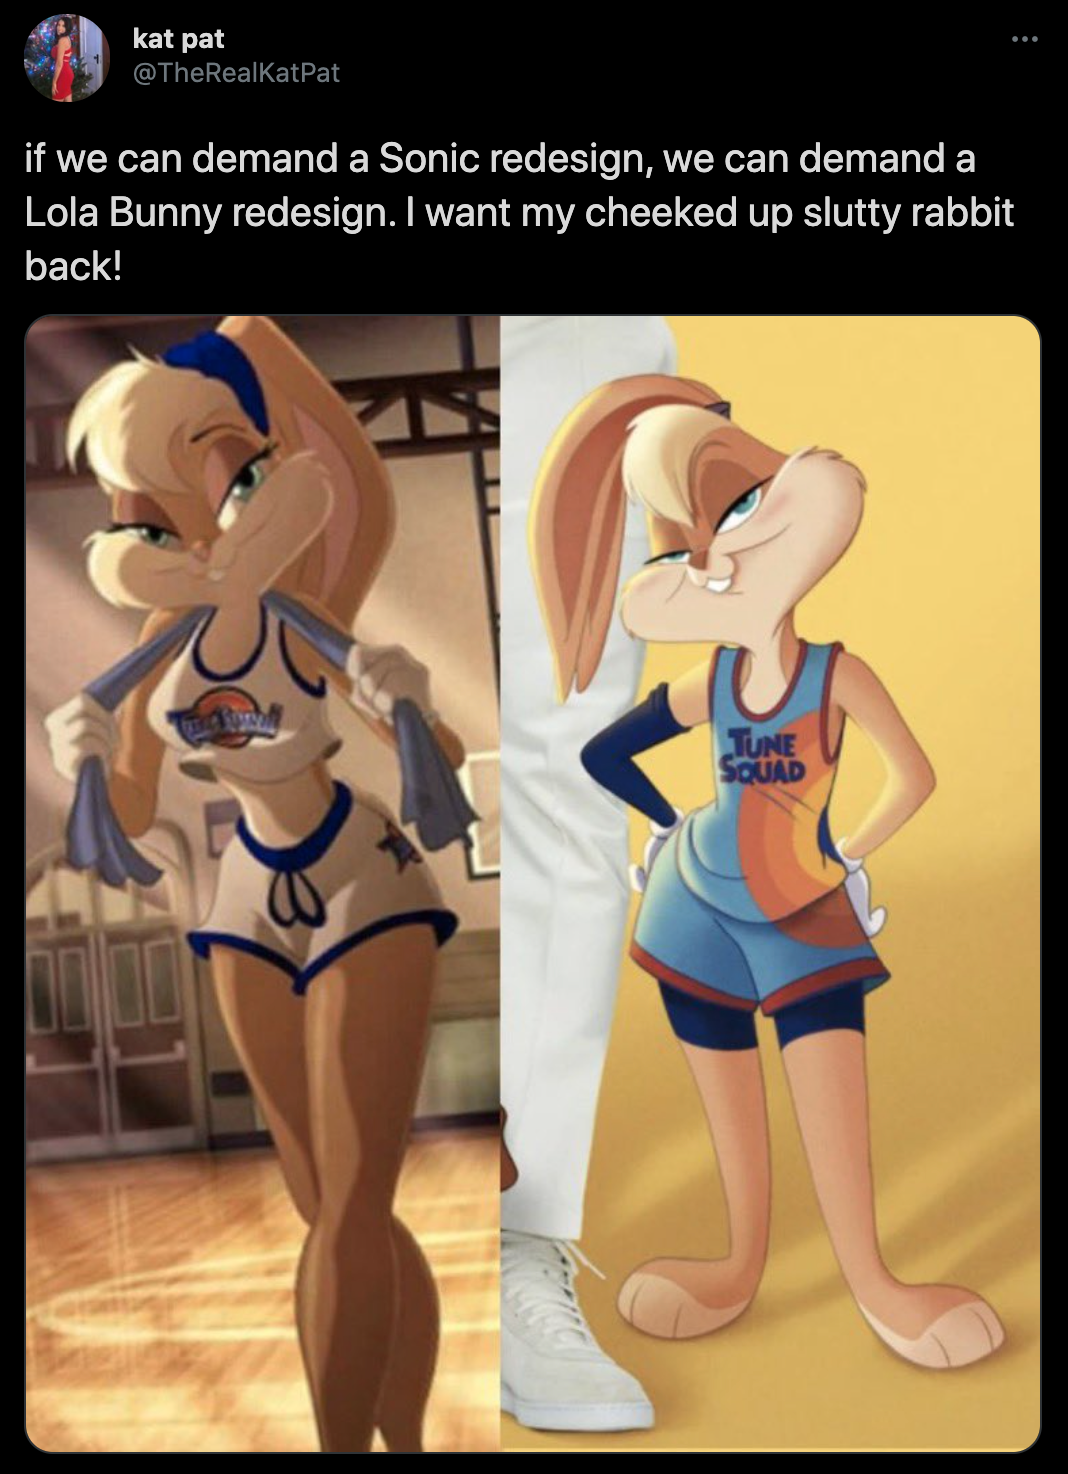 if we can demand a Sonic redesign, we can demand a Lola Bunny redesign. I want my cheeked up slutty rabbit back!